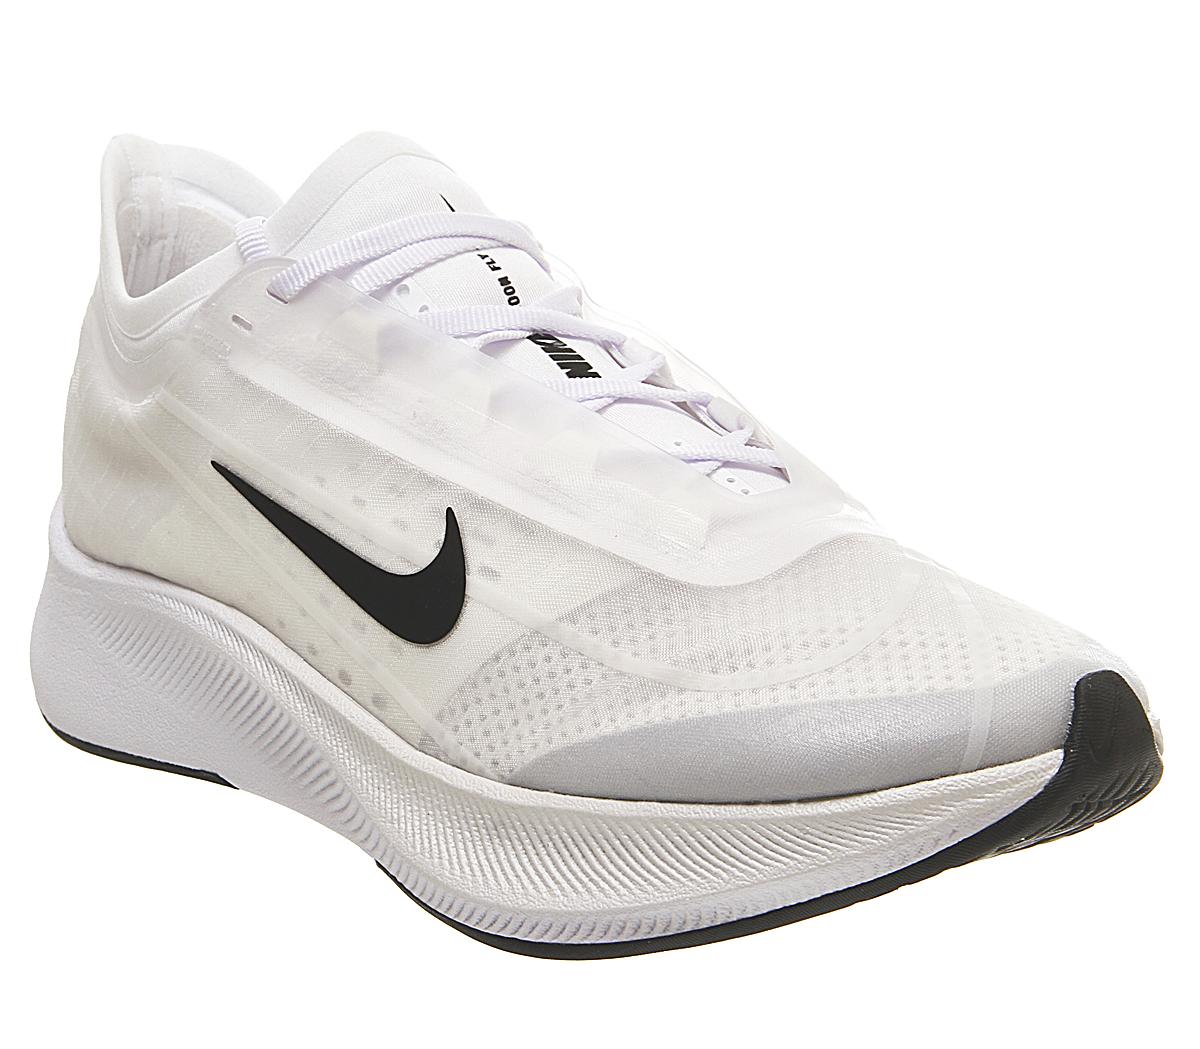 Nike Zoom Fly 3 Trainers White Black 